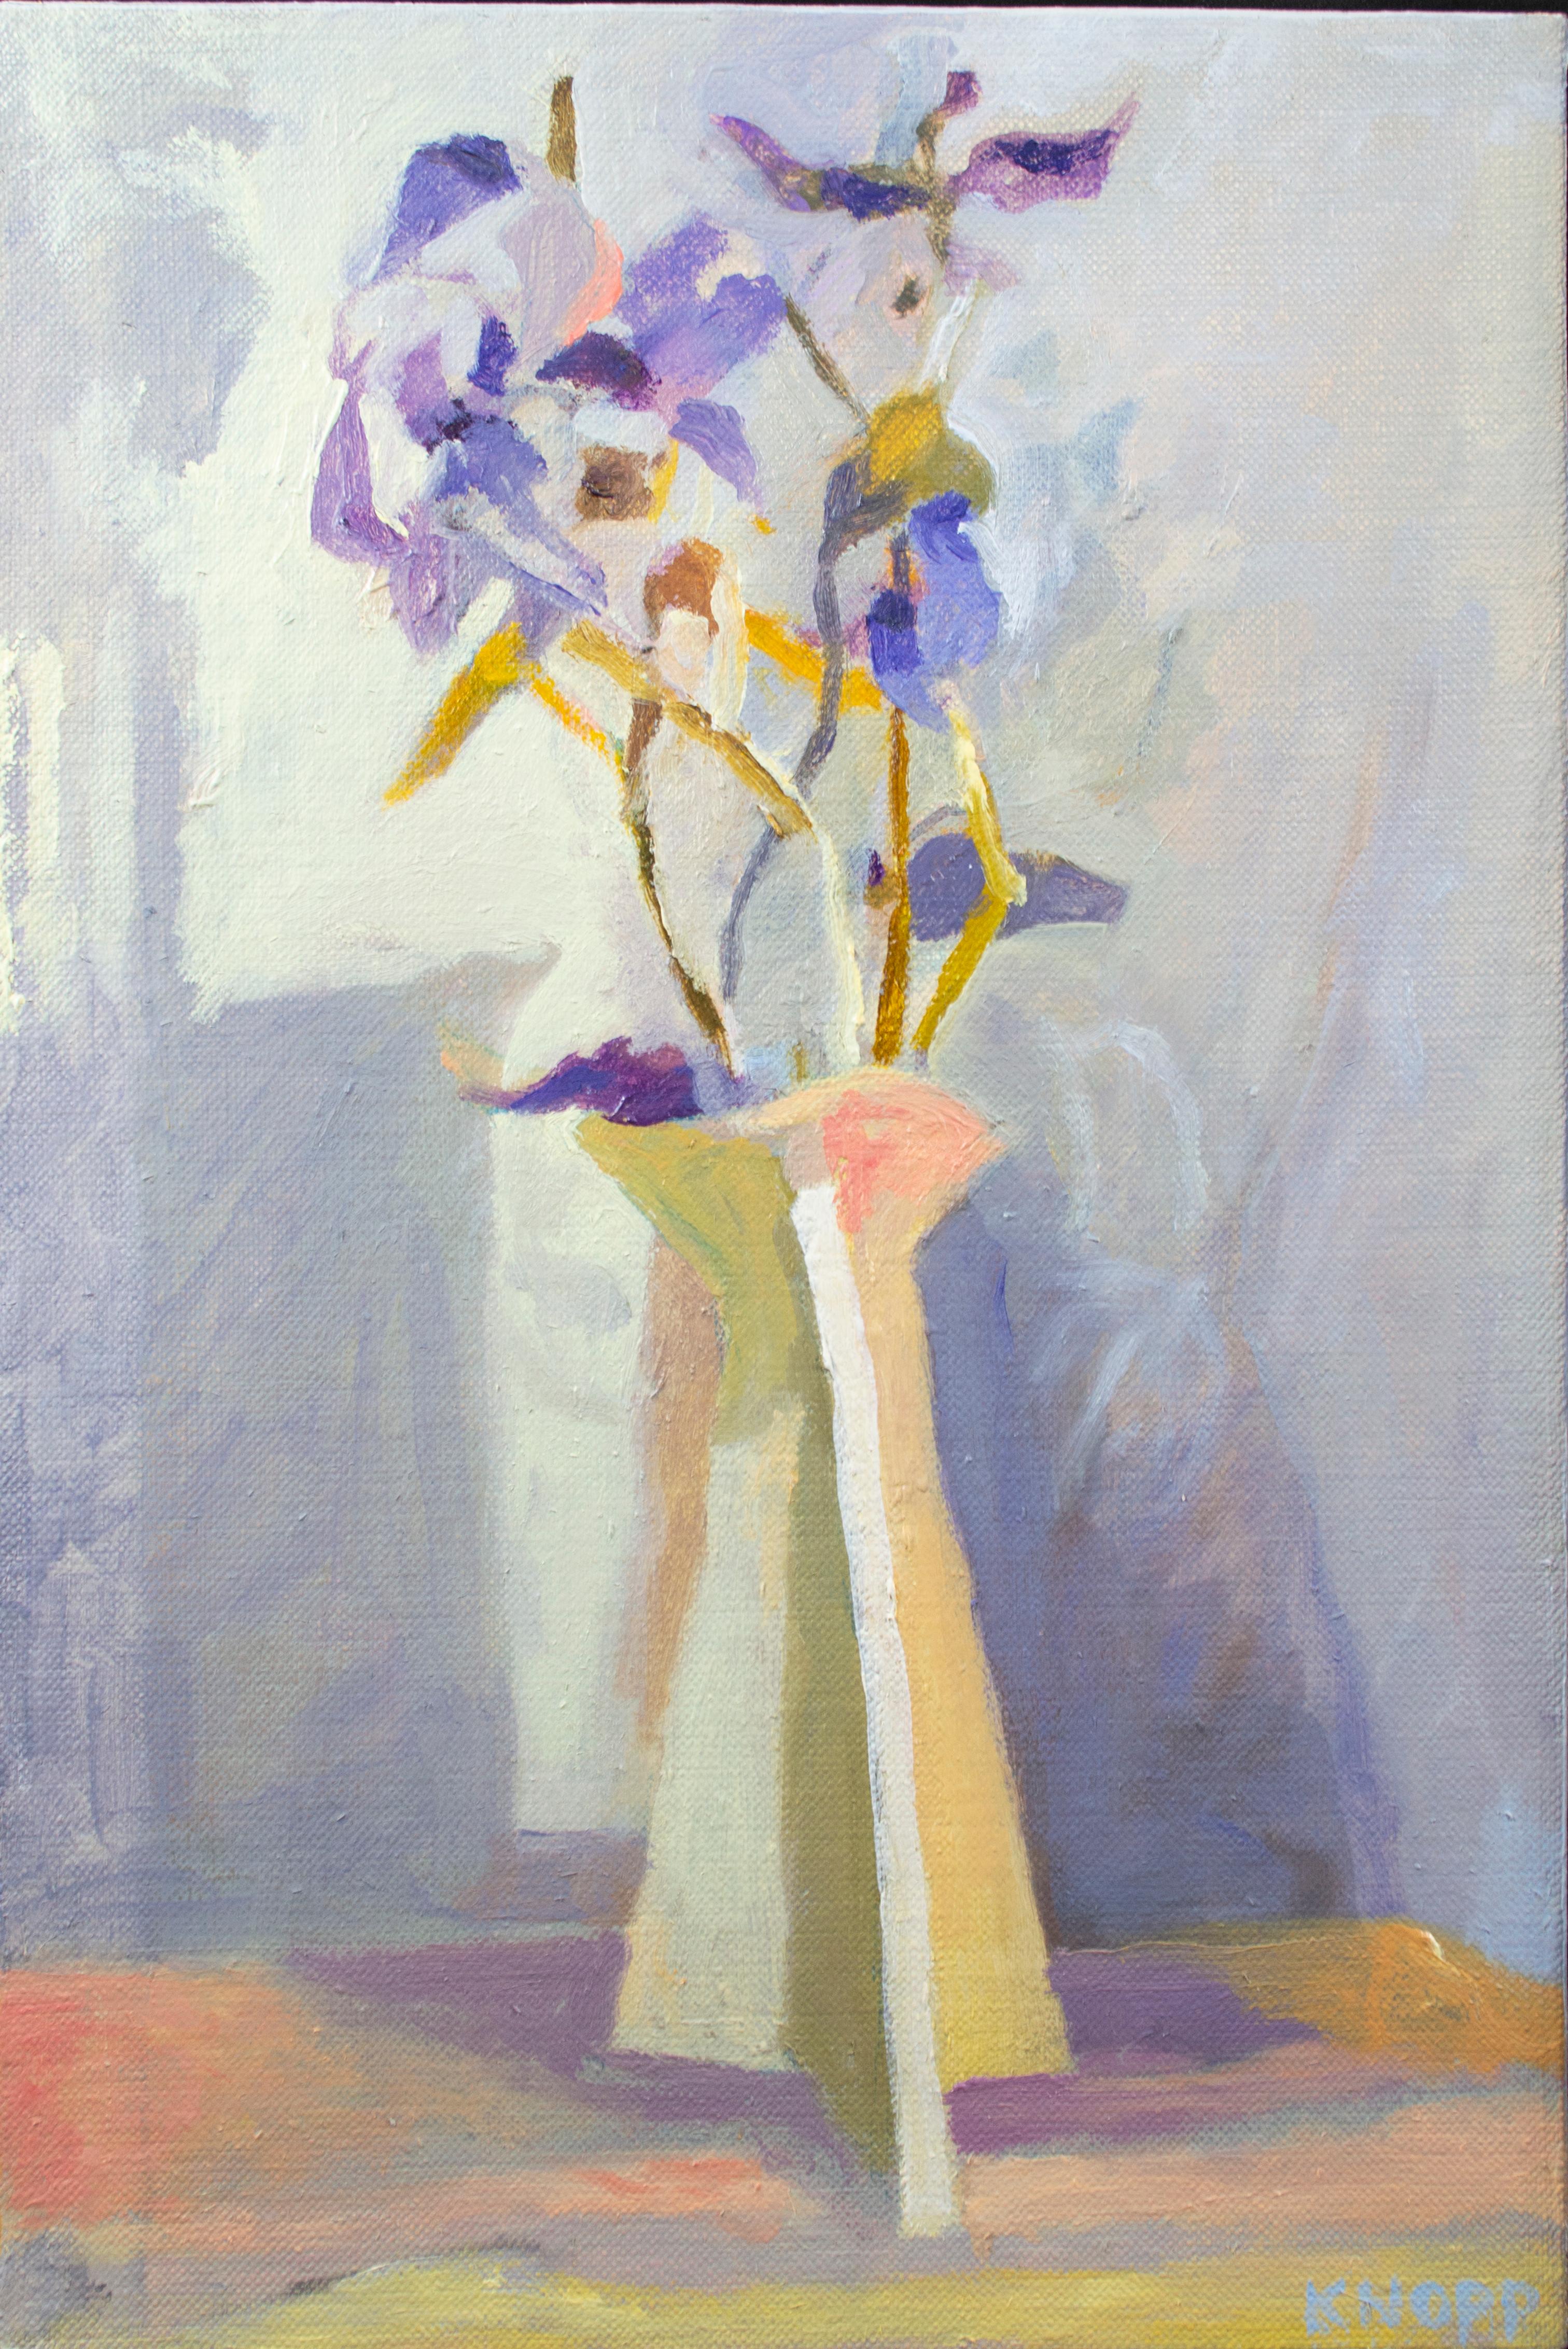 'Dried Flowers in a Stoneware Vase' is an original still life in oil signed by the Midwestern artist Kevin Knopp. In the still life, the natural forms of the purple flowers rise up from the geometric forms of the base below, with its shadow case